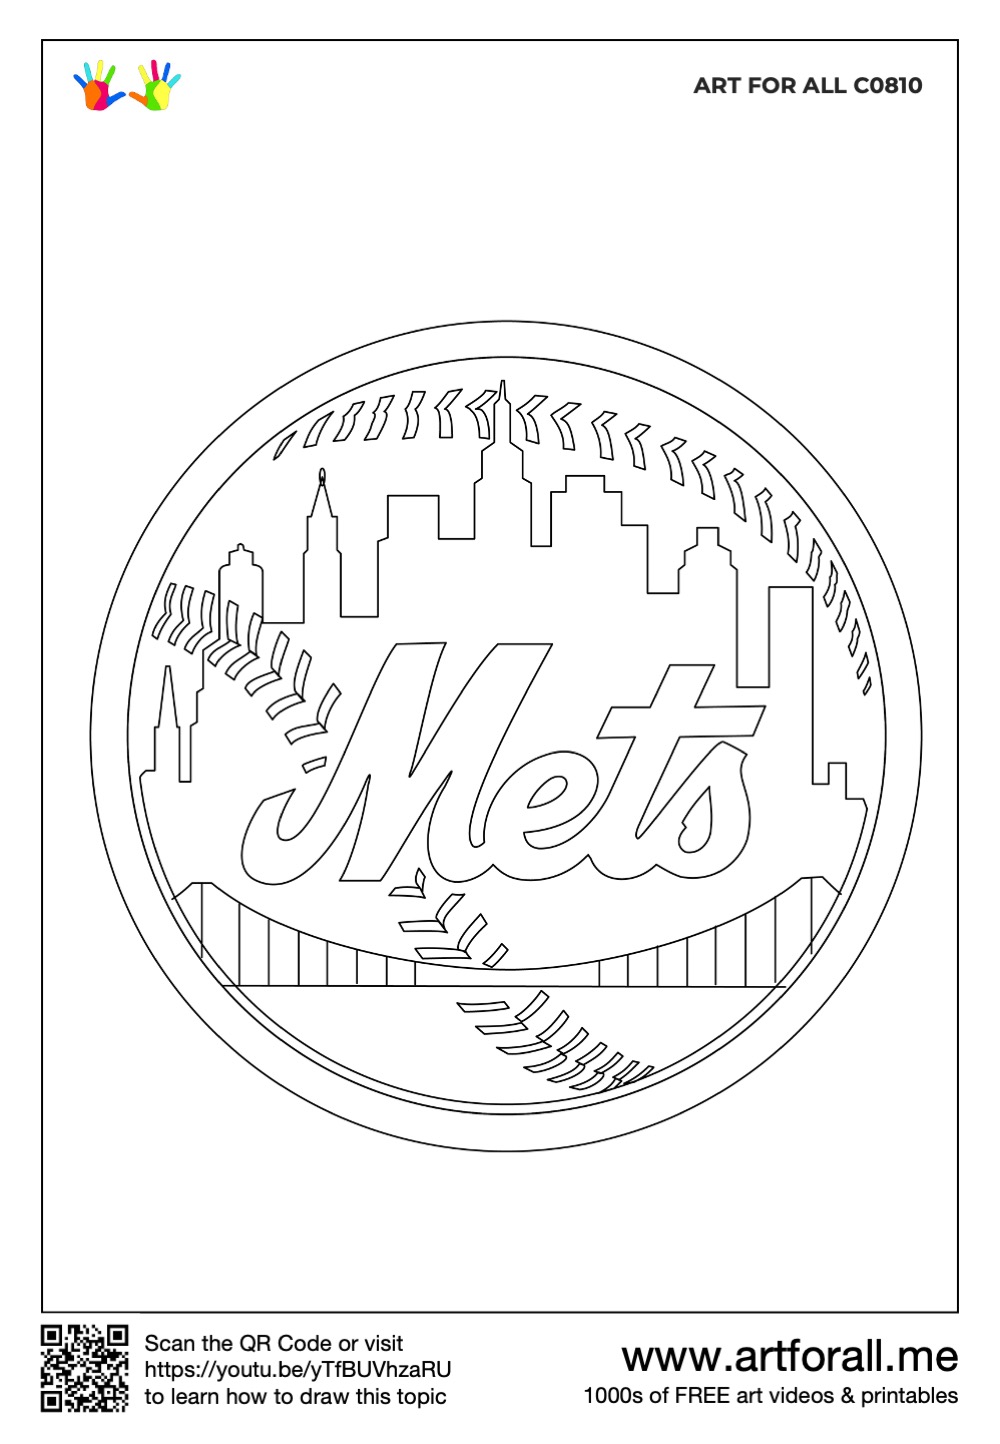 How to draw the new york ts